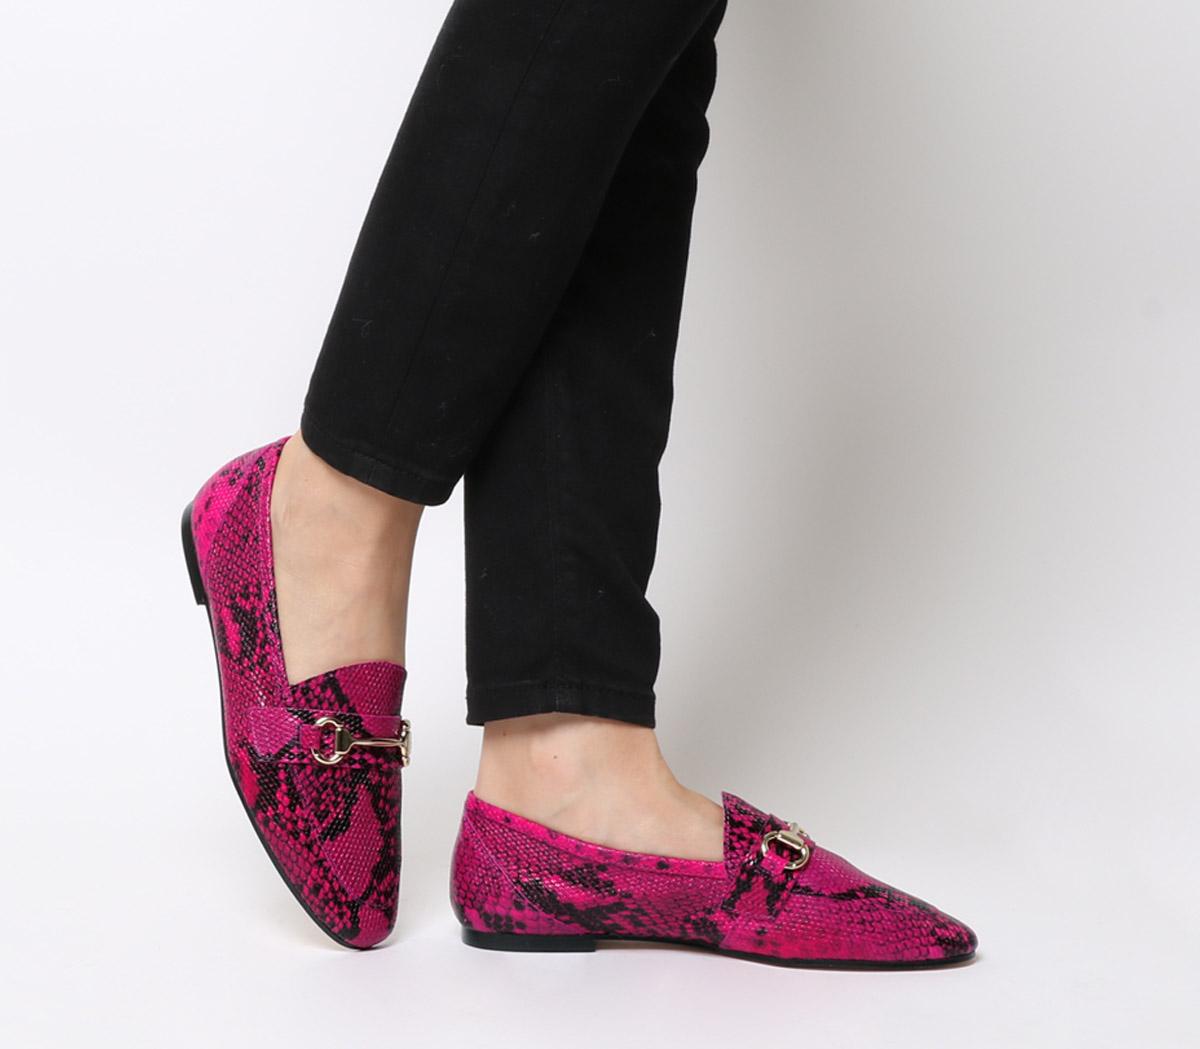 OFFICEDestiny Trim LoaferPink Snake Leather